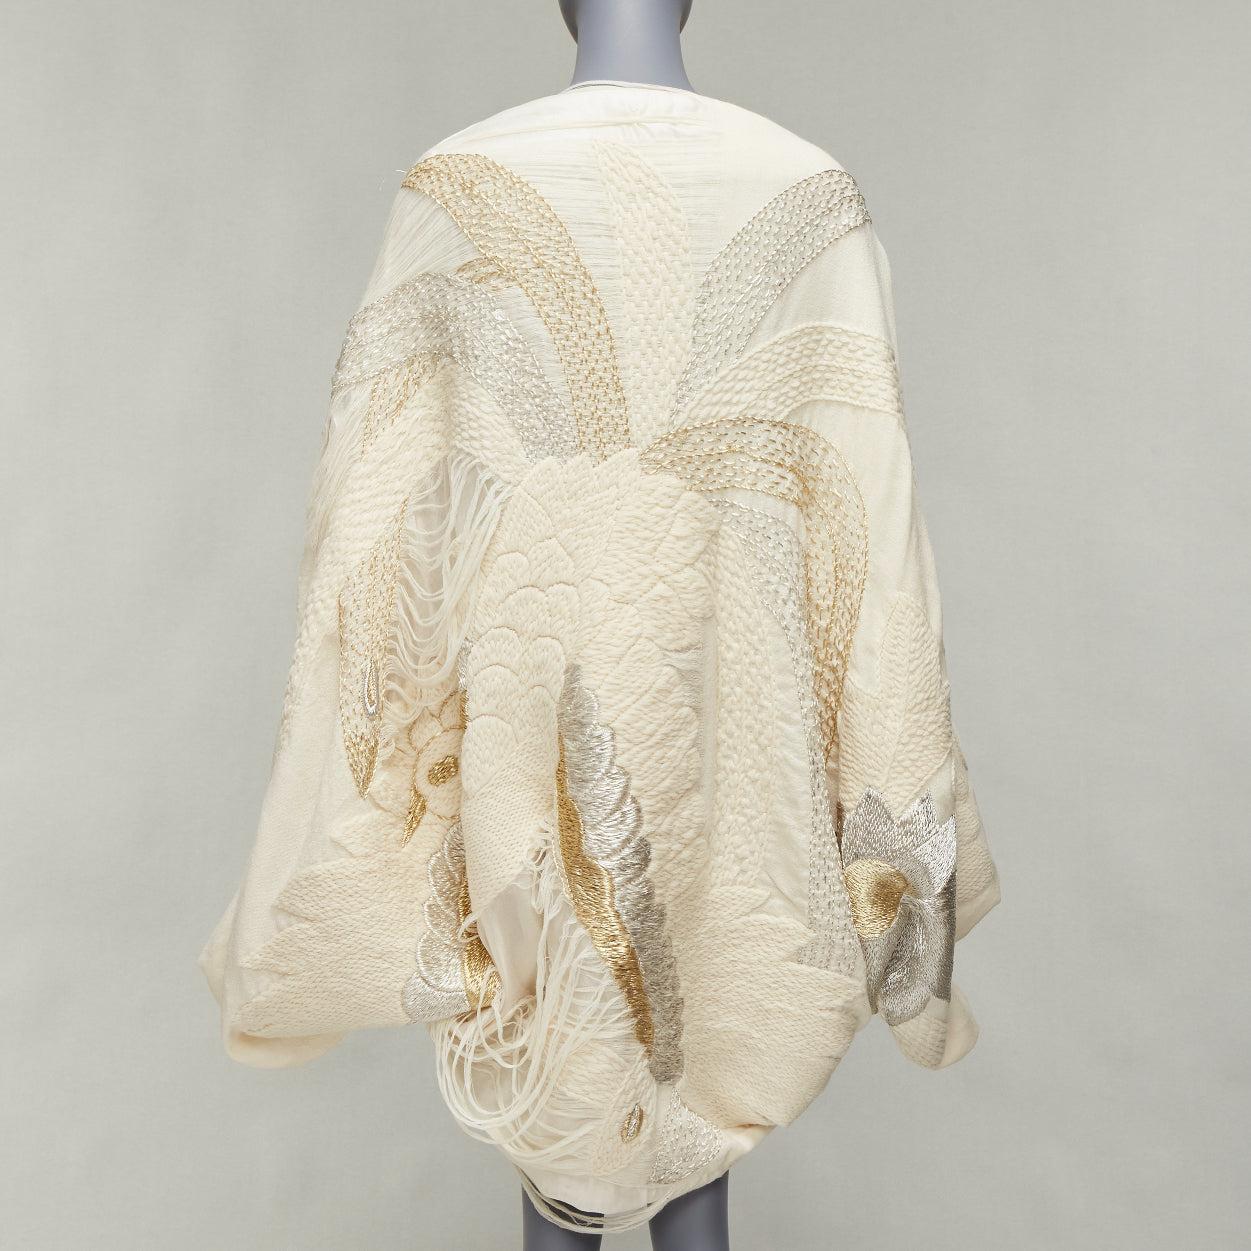 NO BRAND cream gold silver embroidery fringe applique oversized shawl
Reference: NKLL/A00230
Brand: No Brand
Material: Feels like wool
Color: Cream, Gold
Pattern: Solid
Lining: Cream Fabric

CONDITION:
Condition: Good, this item was pre-owned and is